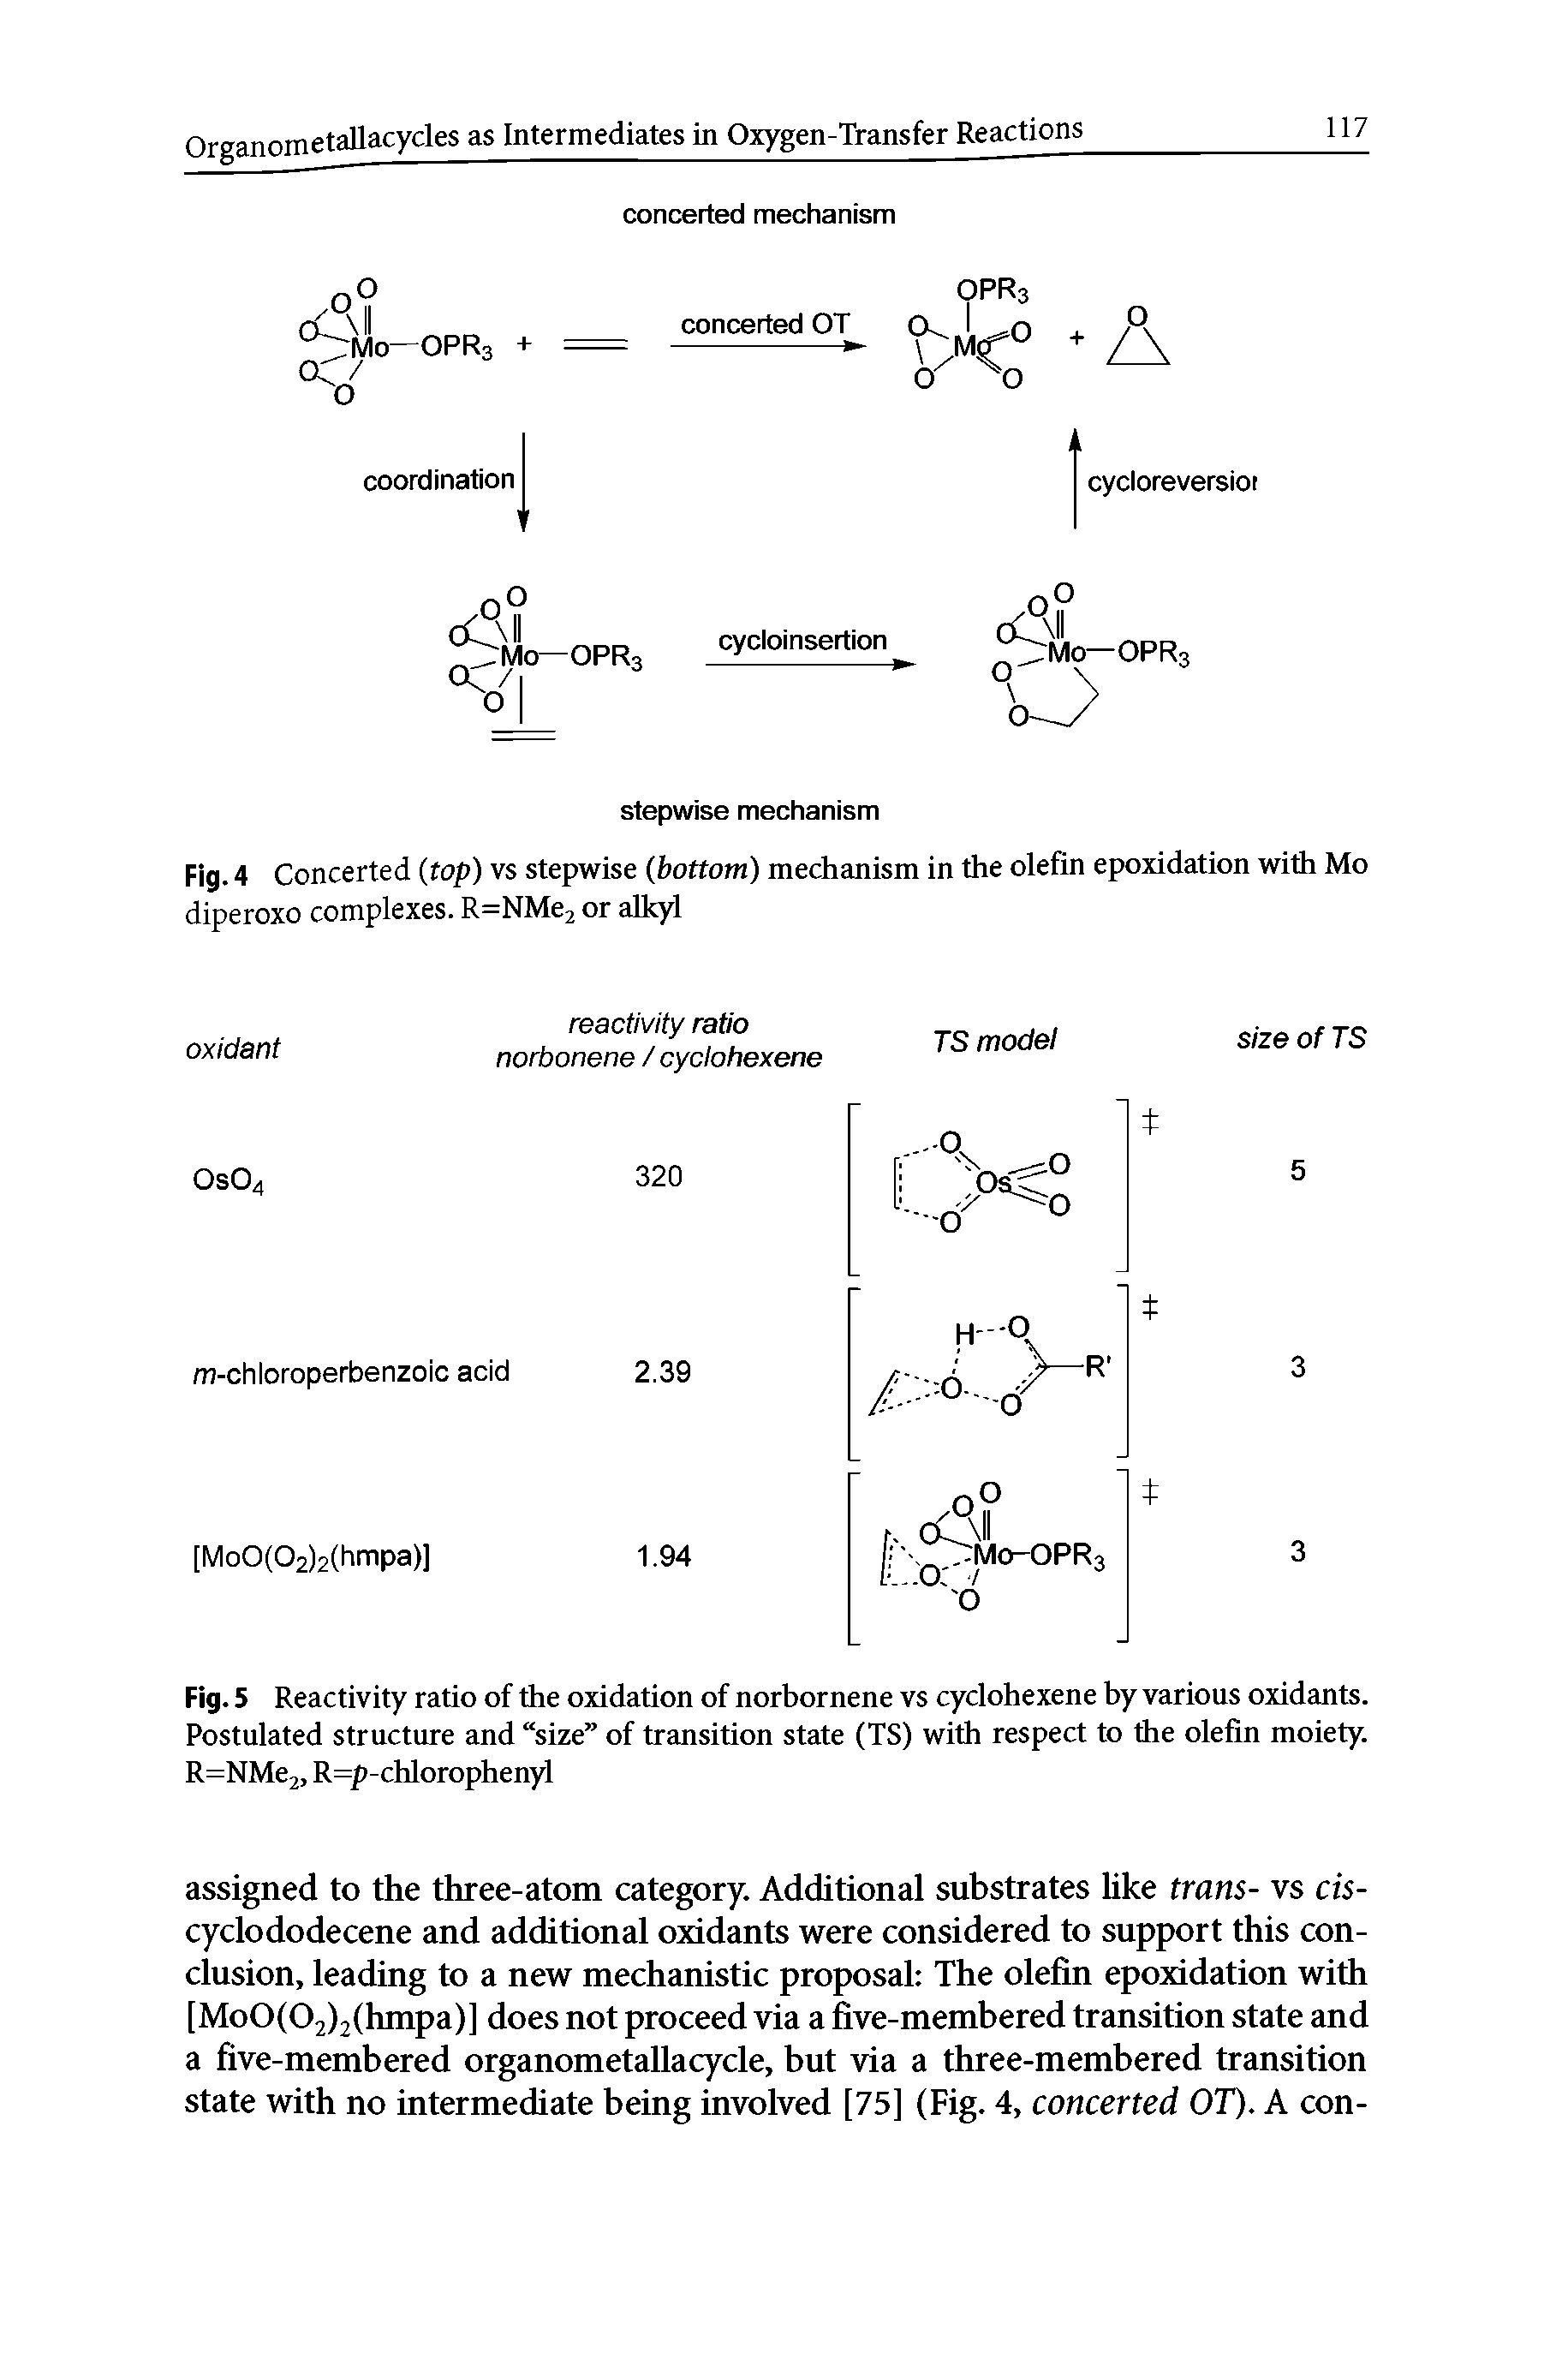 Fig. 4 Concerted (top) vs stepwise (bottom) mechanism in the olefin epoxidation with Mo diperoxo complexes. R=NMe2 or alkyl...